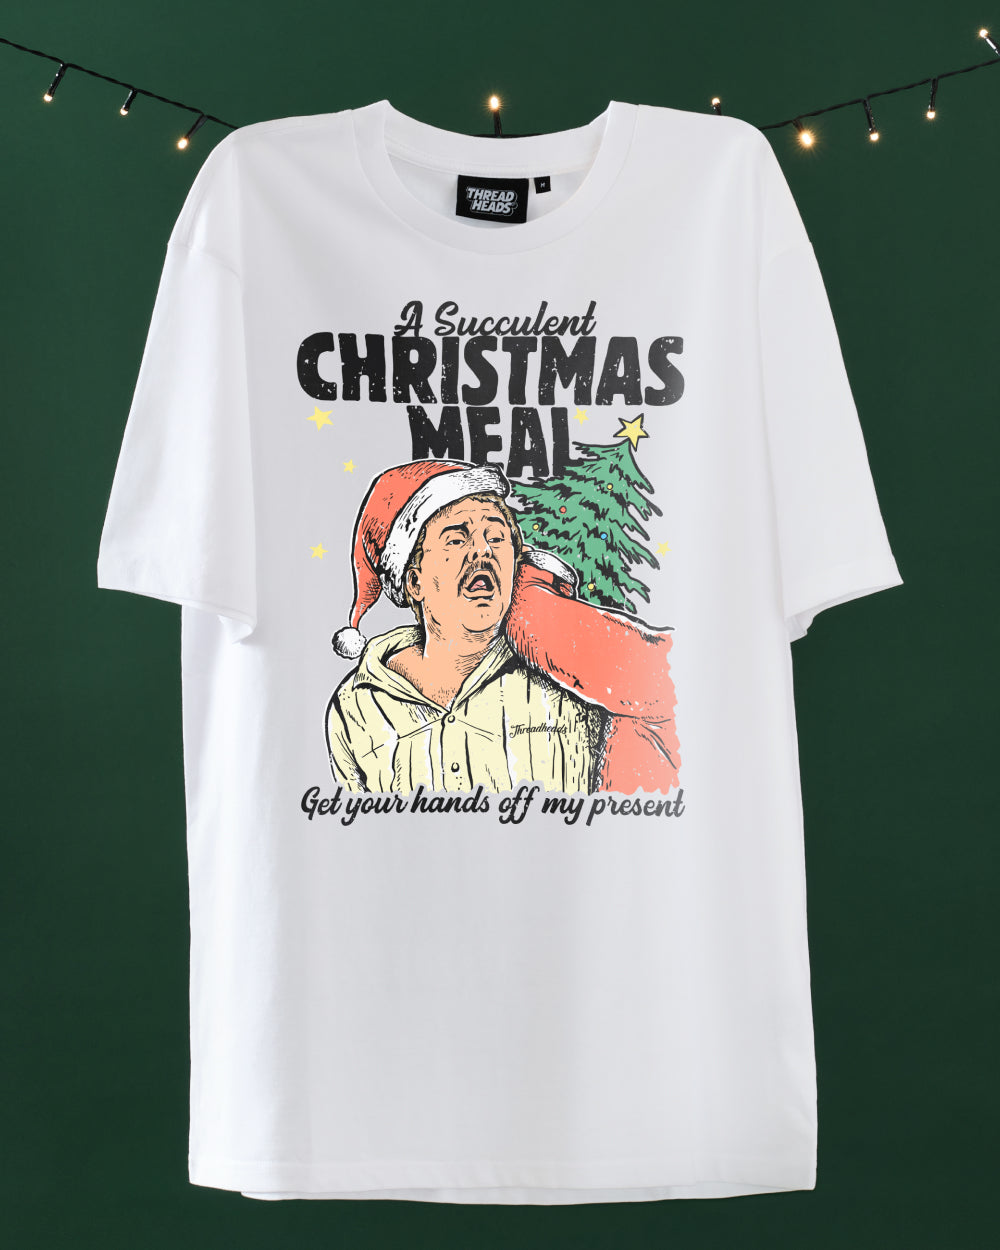 Succulent Chinese Christmas T-Shirt Europe Online White